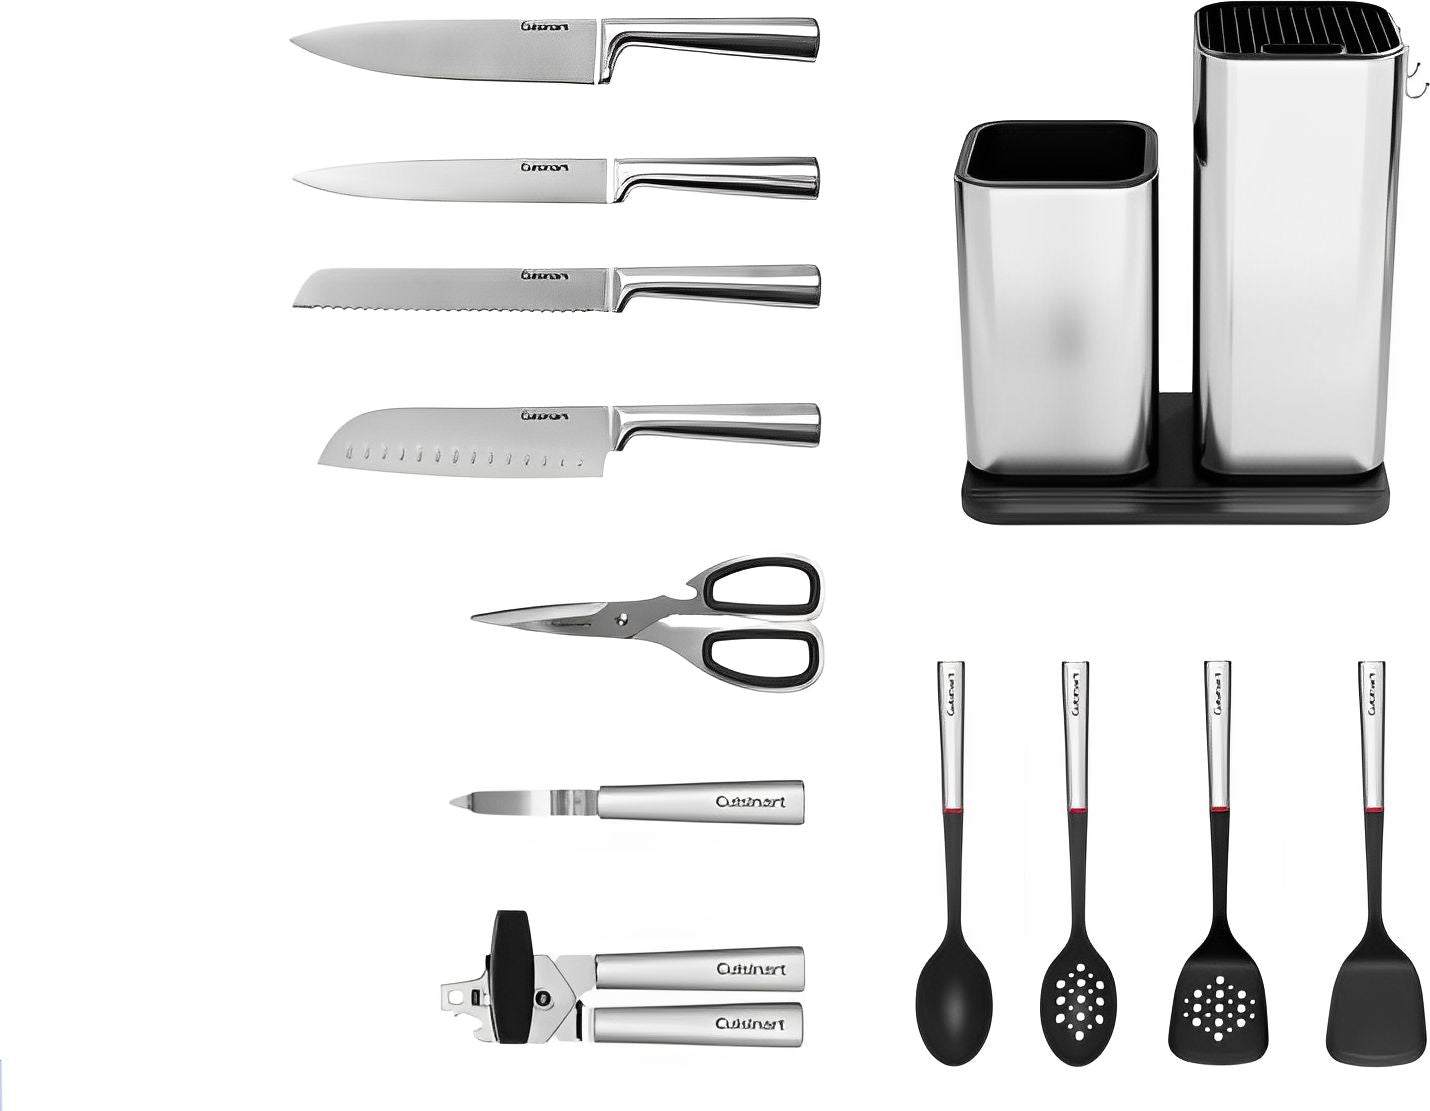 Cuisinart - 12 PC Knife Block Set with Tools & Gadgets - C77SS-12P3